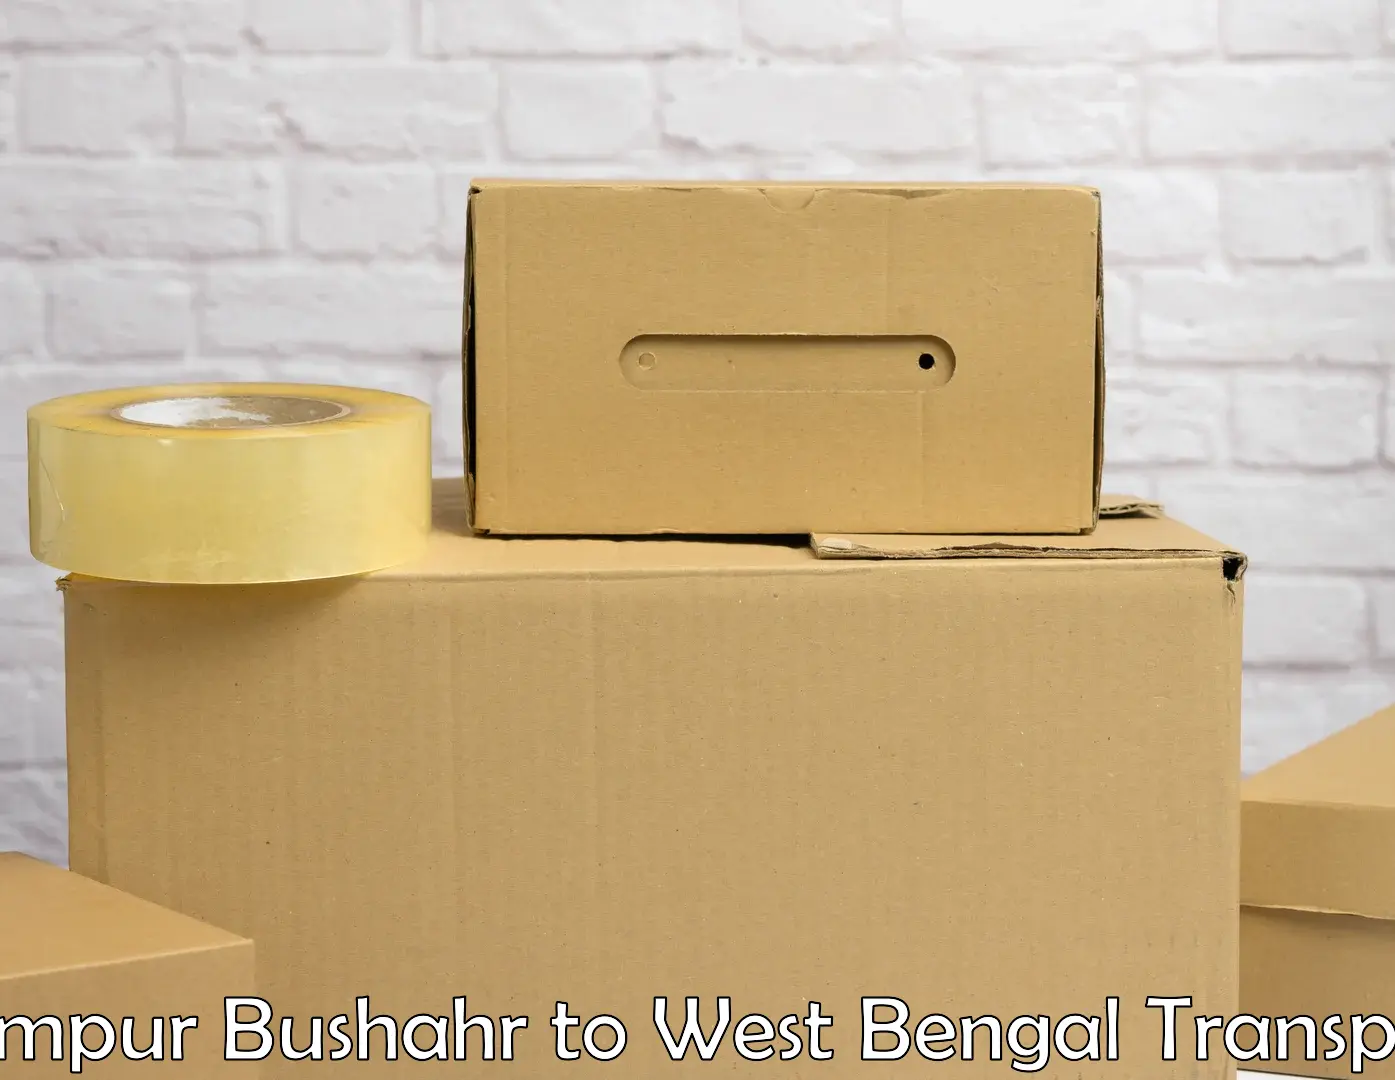 Container transportation services Rampur Bushahr to Tollygunge